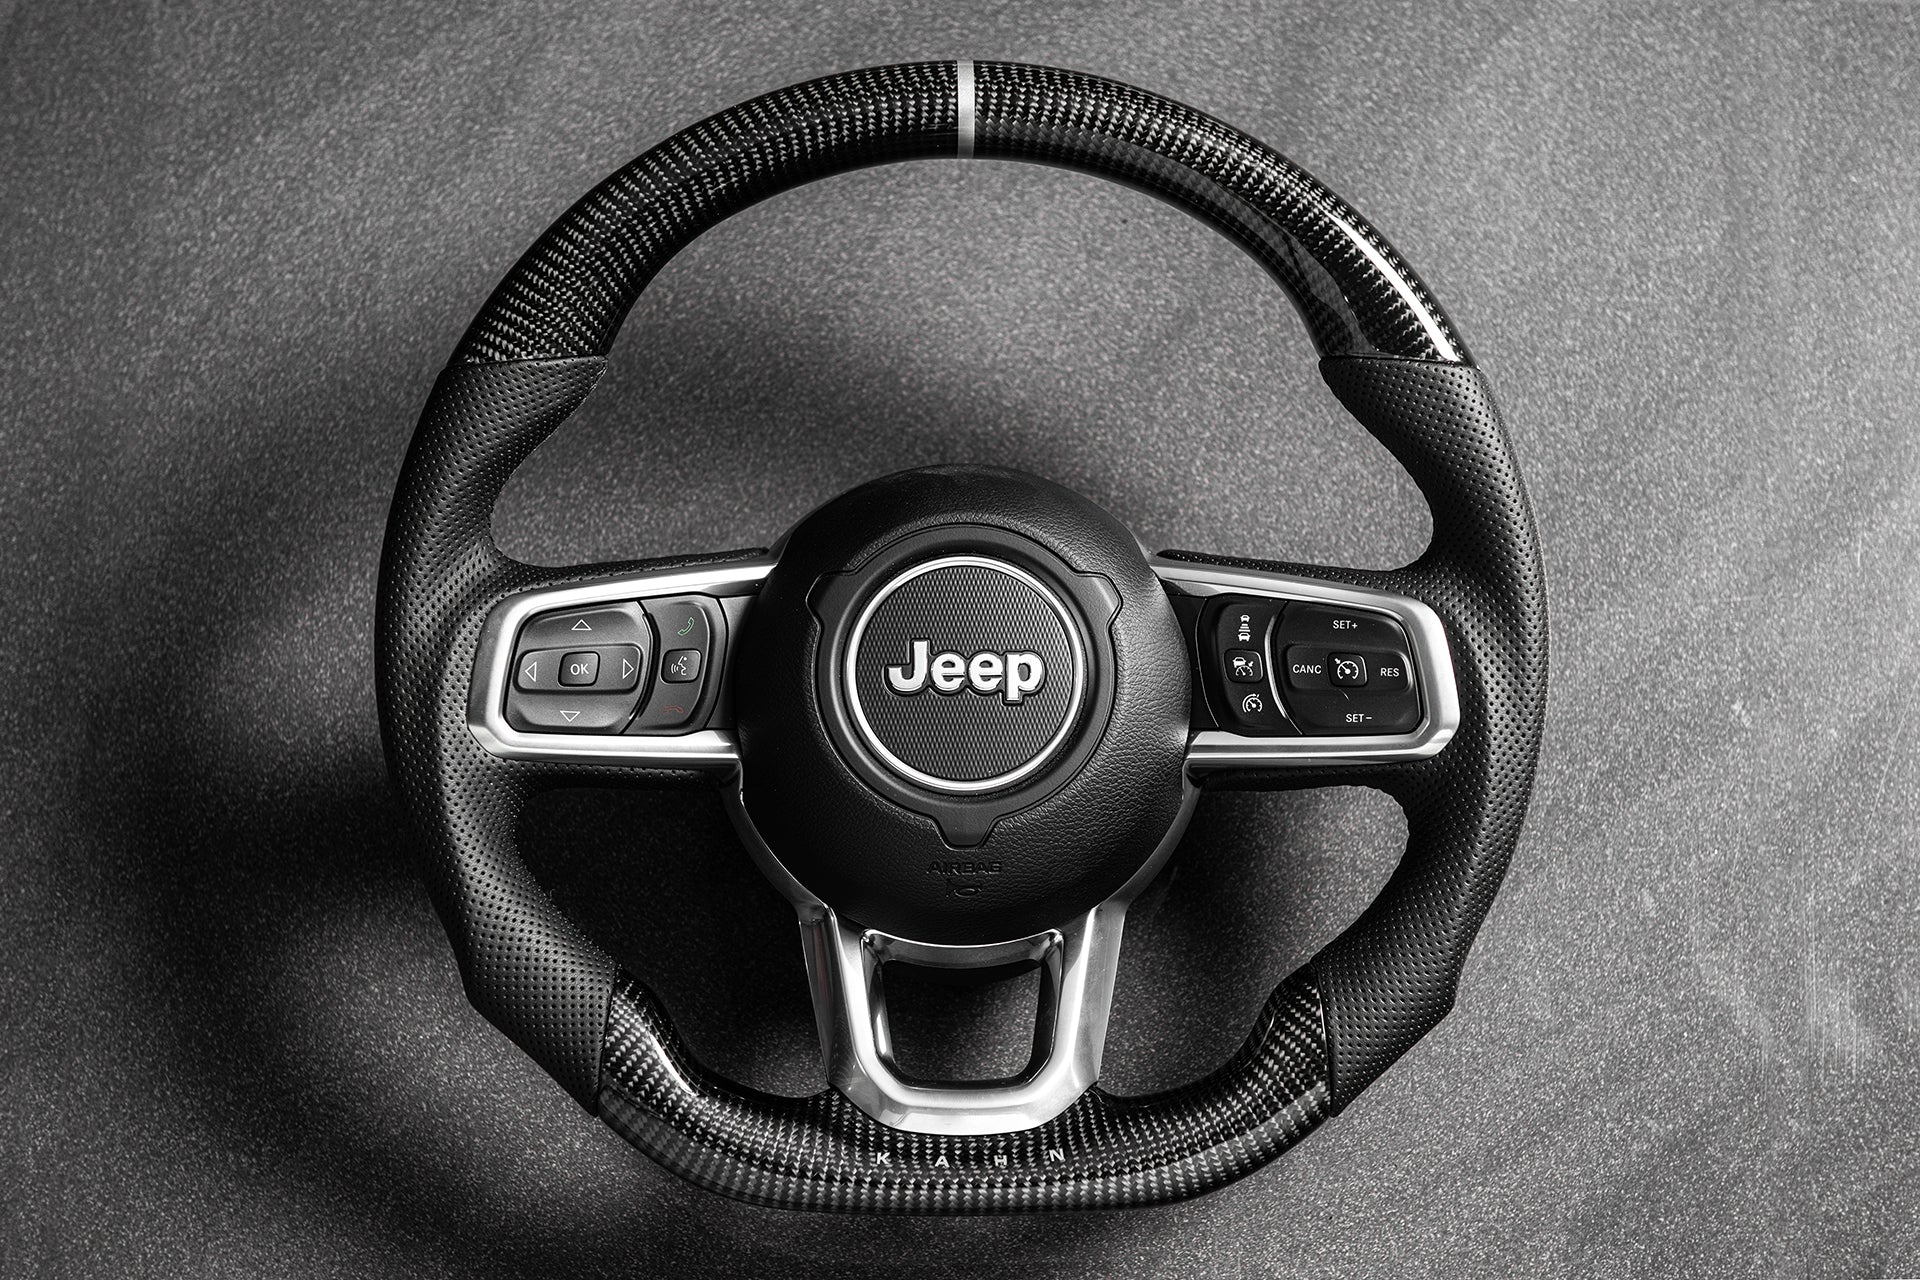 Jeep Wrangler JL (2018-Present) Carbon Sports Steering Wheel with Kahn Lettering